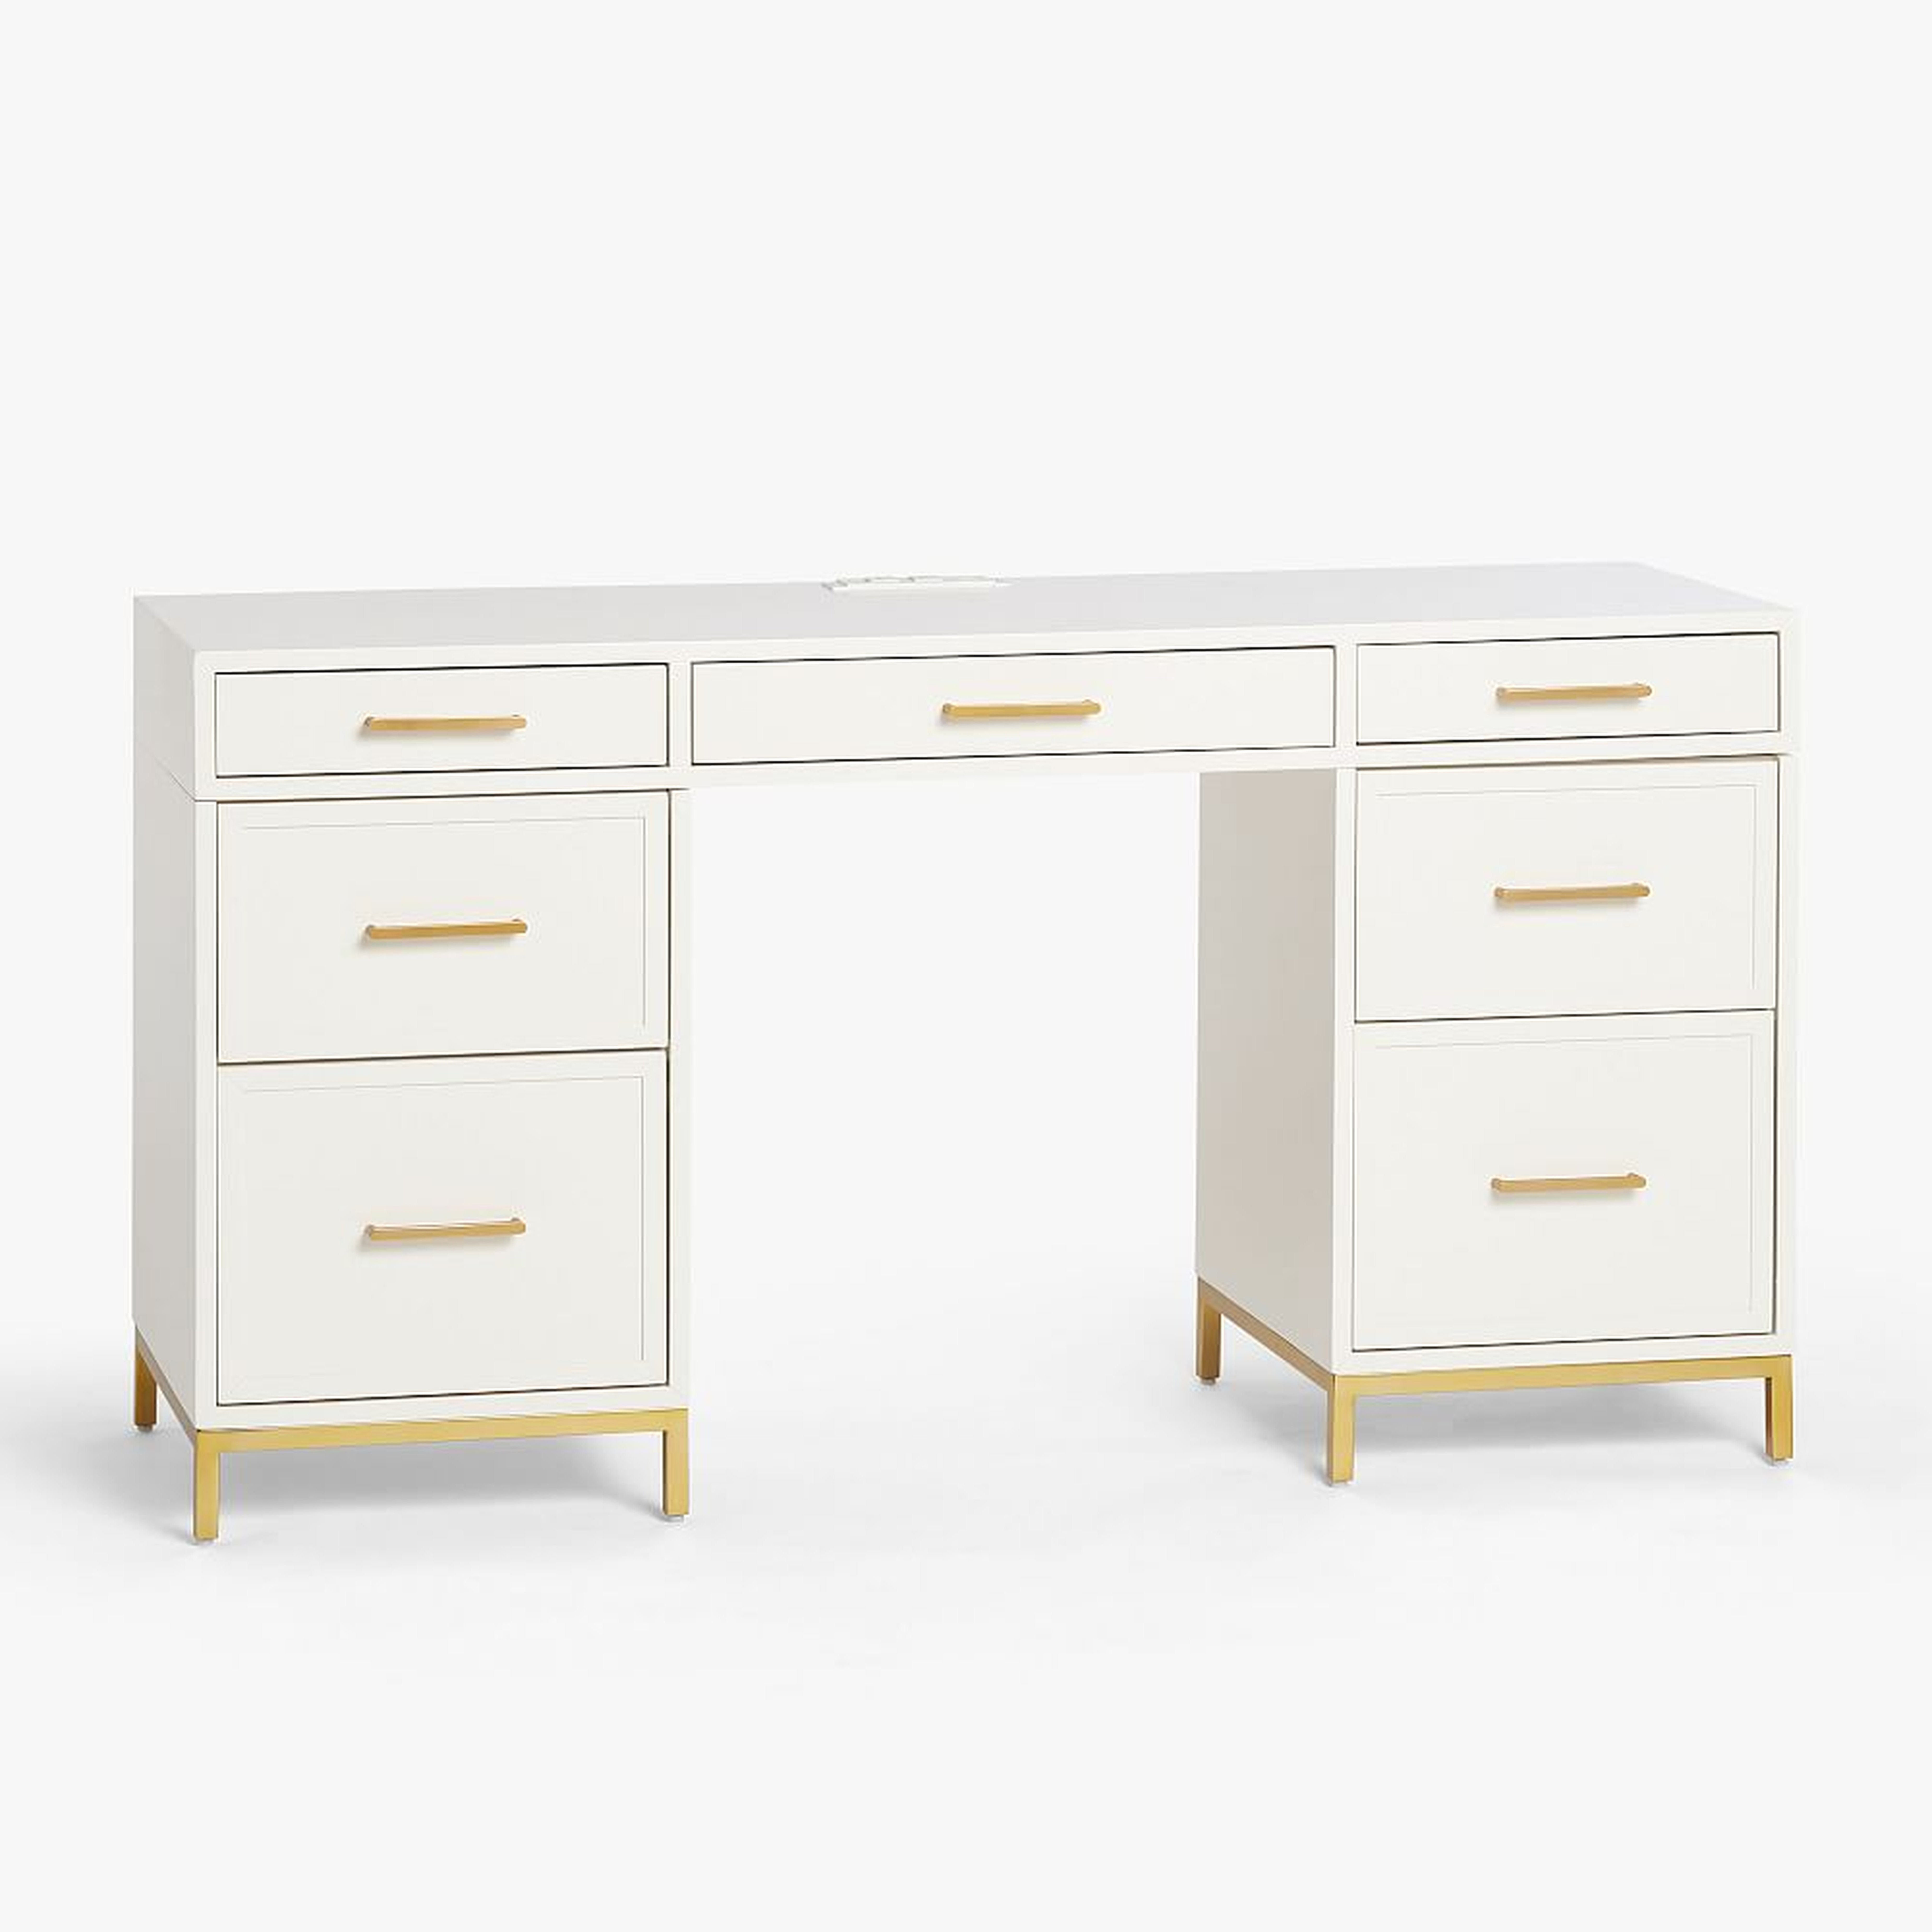 Blaire Smart Storage Desk, Lacquered Simply White - Pottery Barn Teen